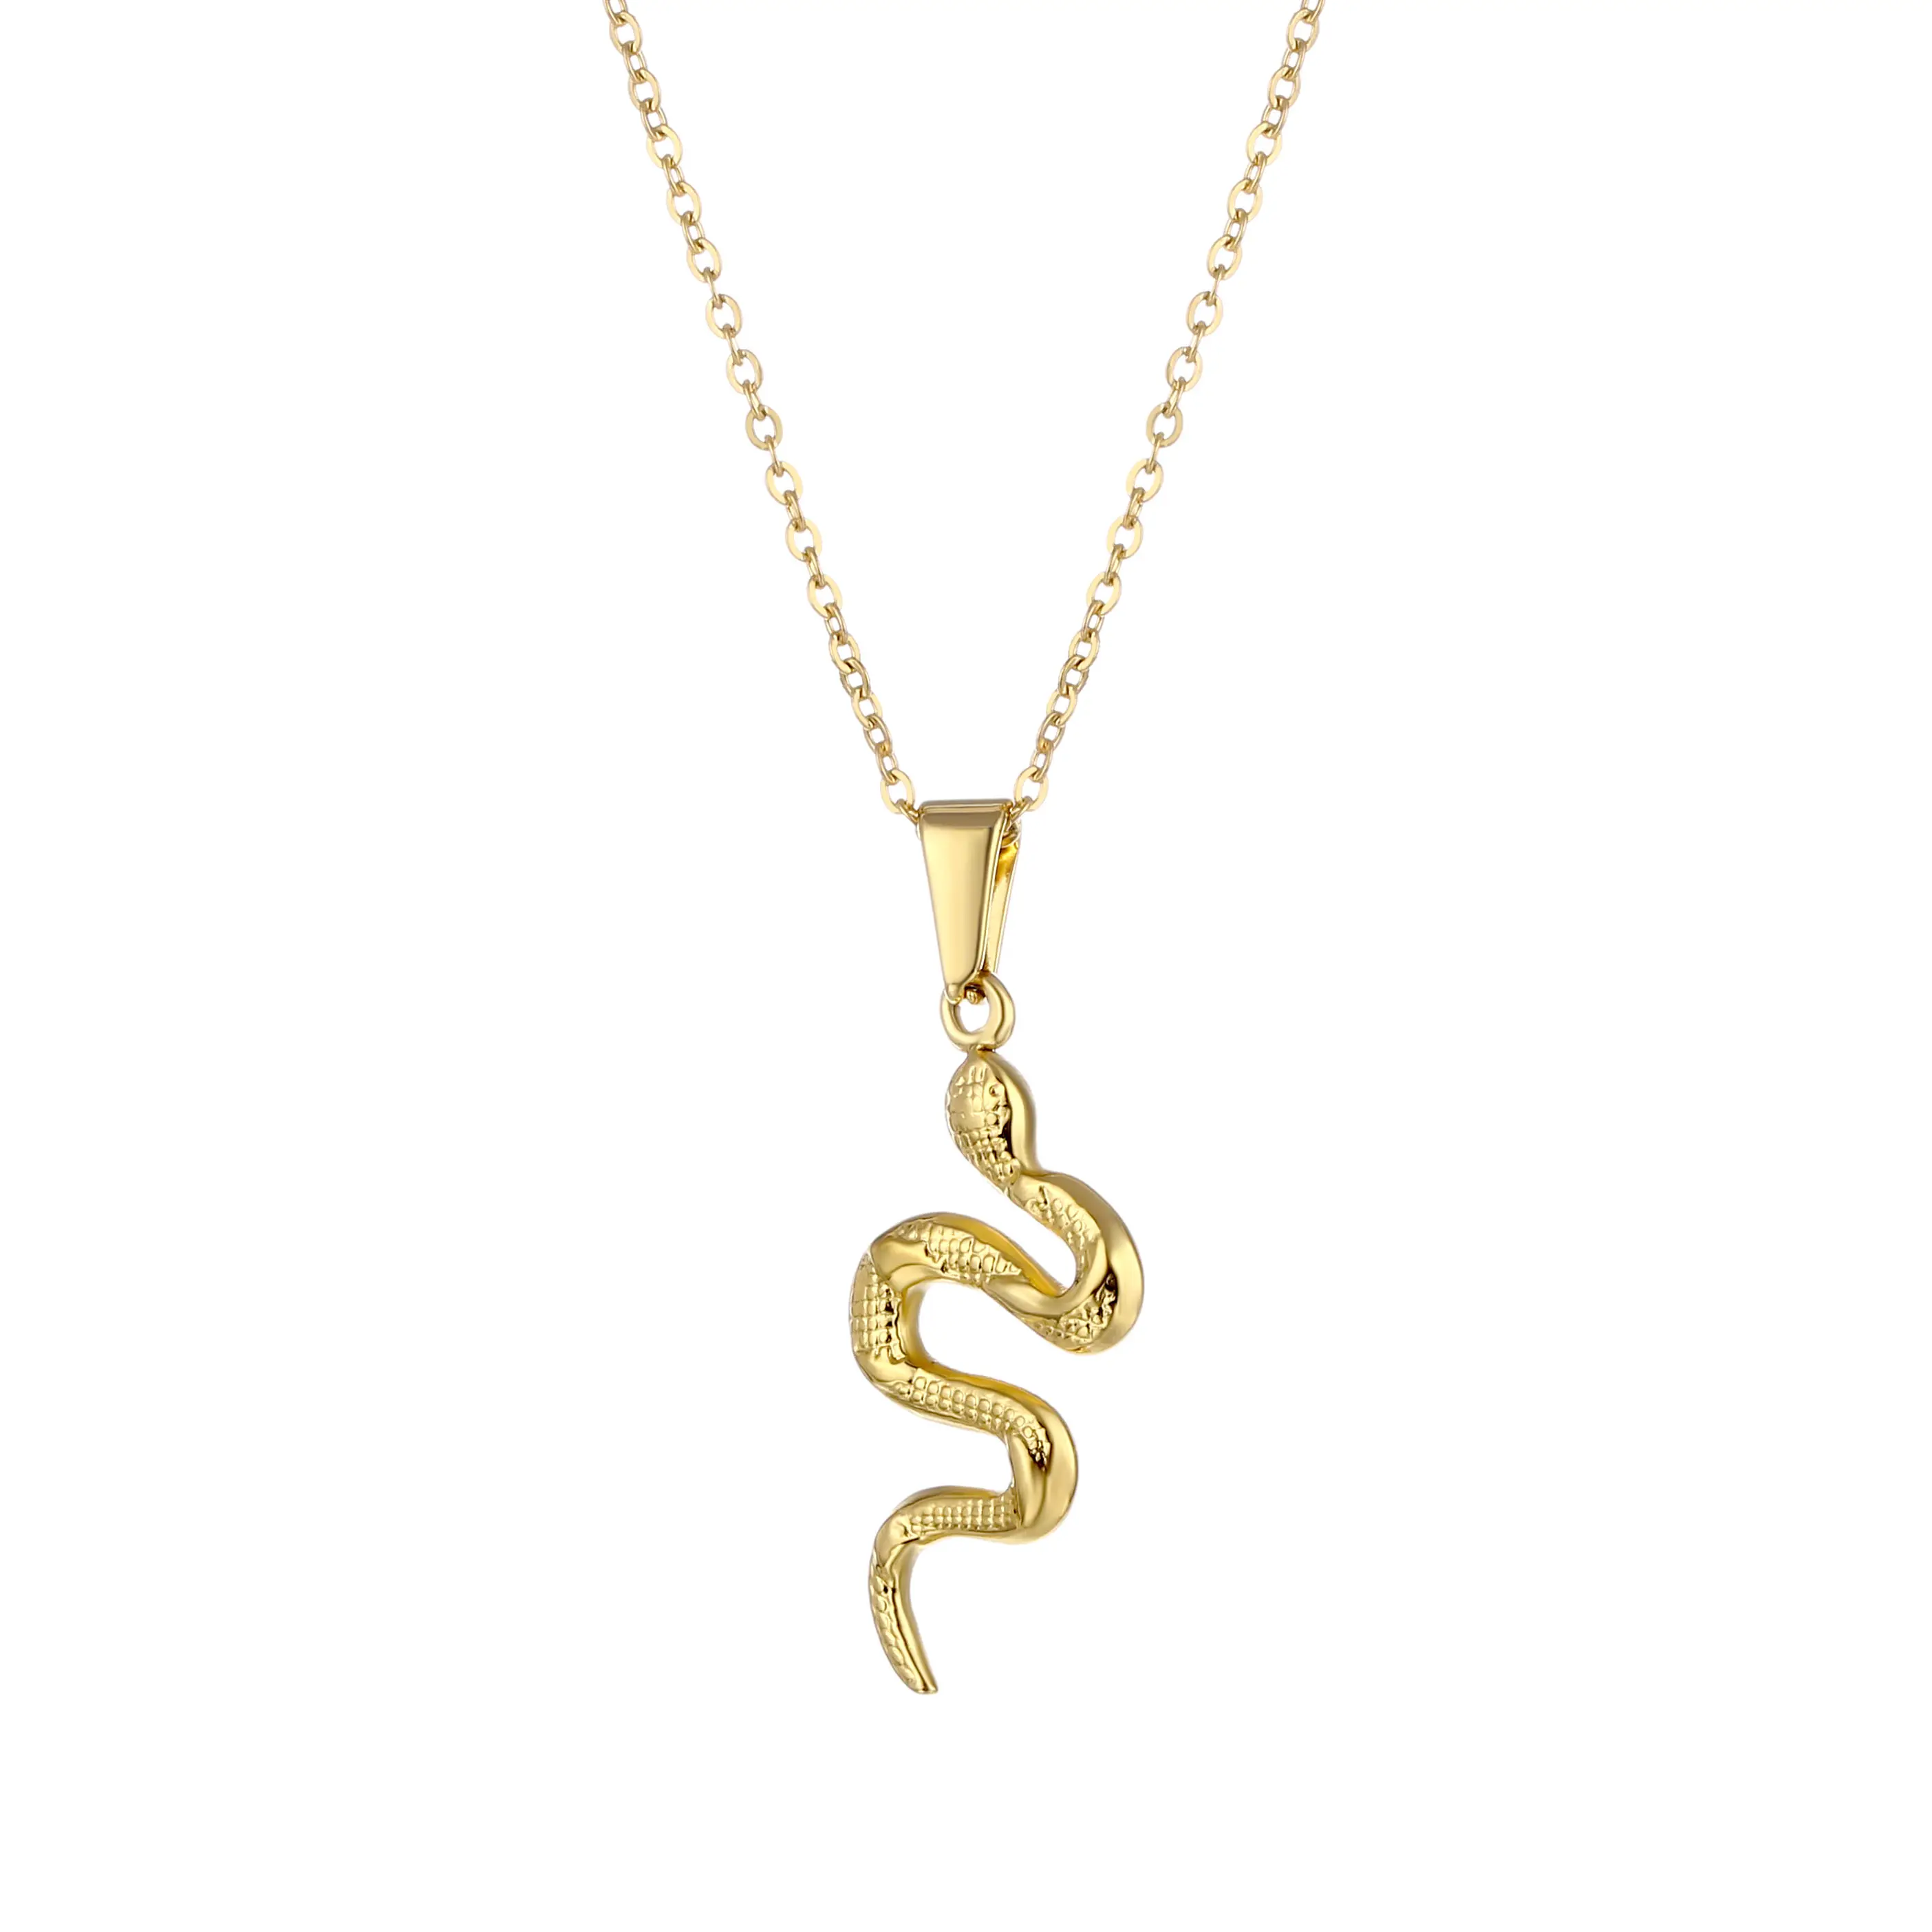 Punk Men Serpent Necklace Stainless Steel Snake Pendant Hips Hops Cobra Charms Gold Silver Animal Snake Cable Chain Jewelry